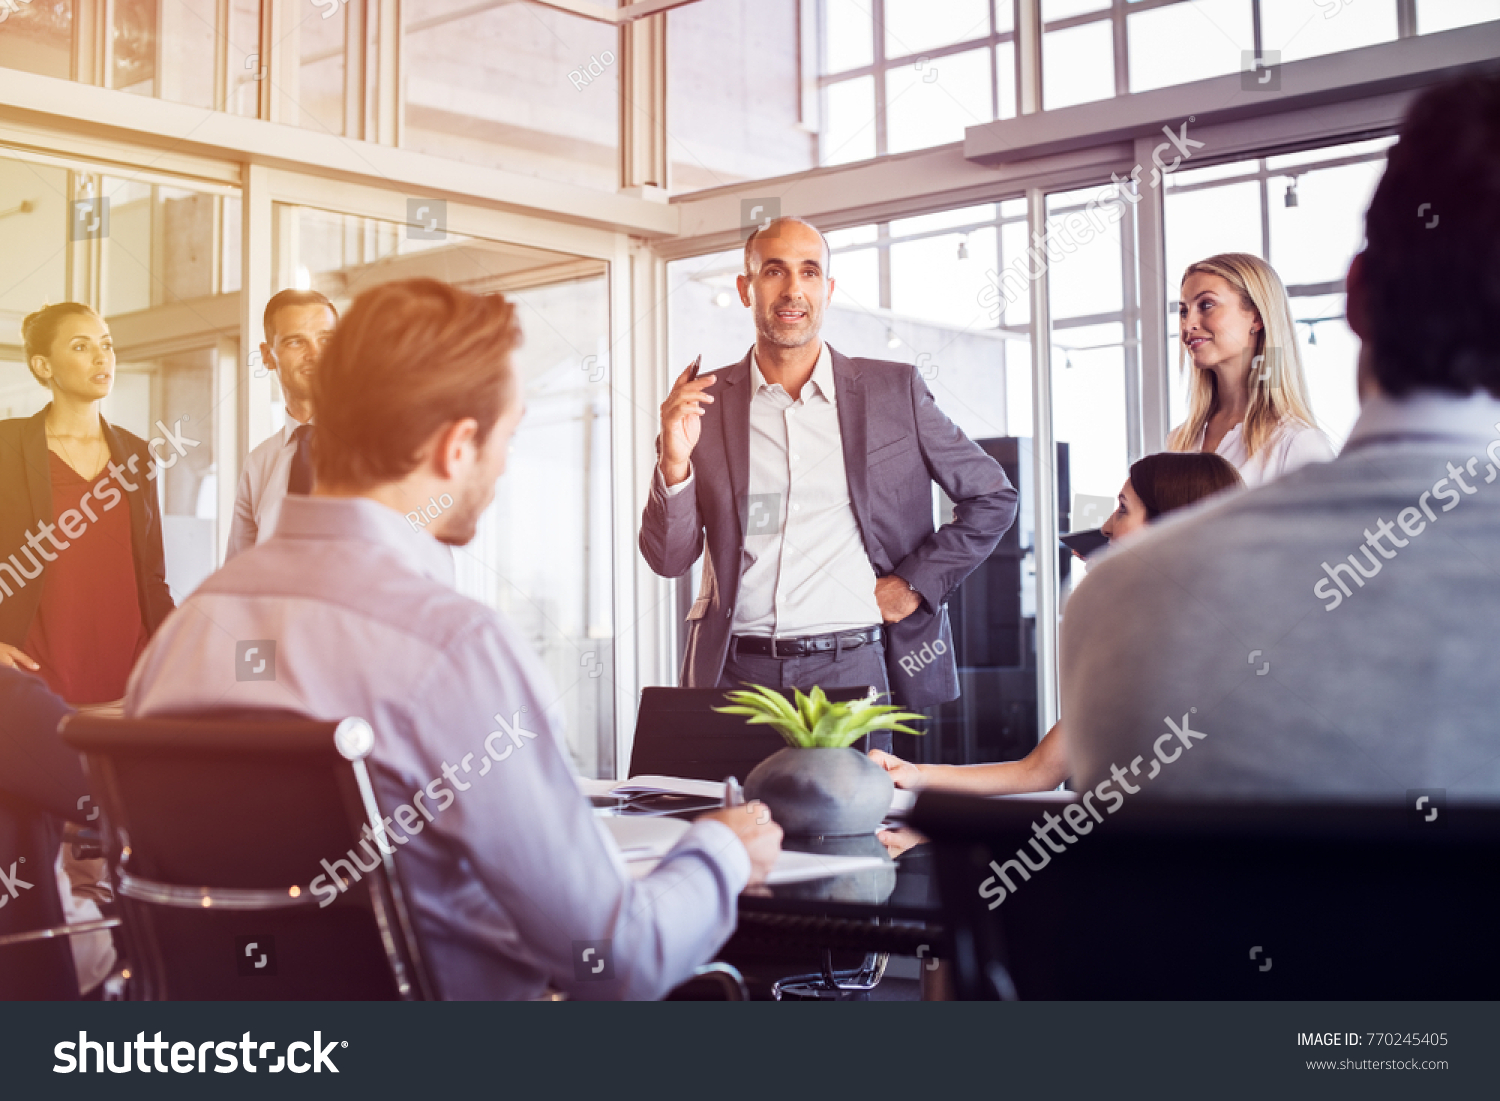 Senior man talking to employees in office meeting. Marketing team discussing new ideas with manager during a conference. Senior leadership training future businessmen and businesswomen. #770245405